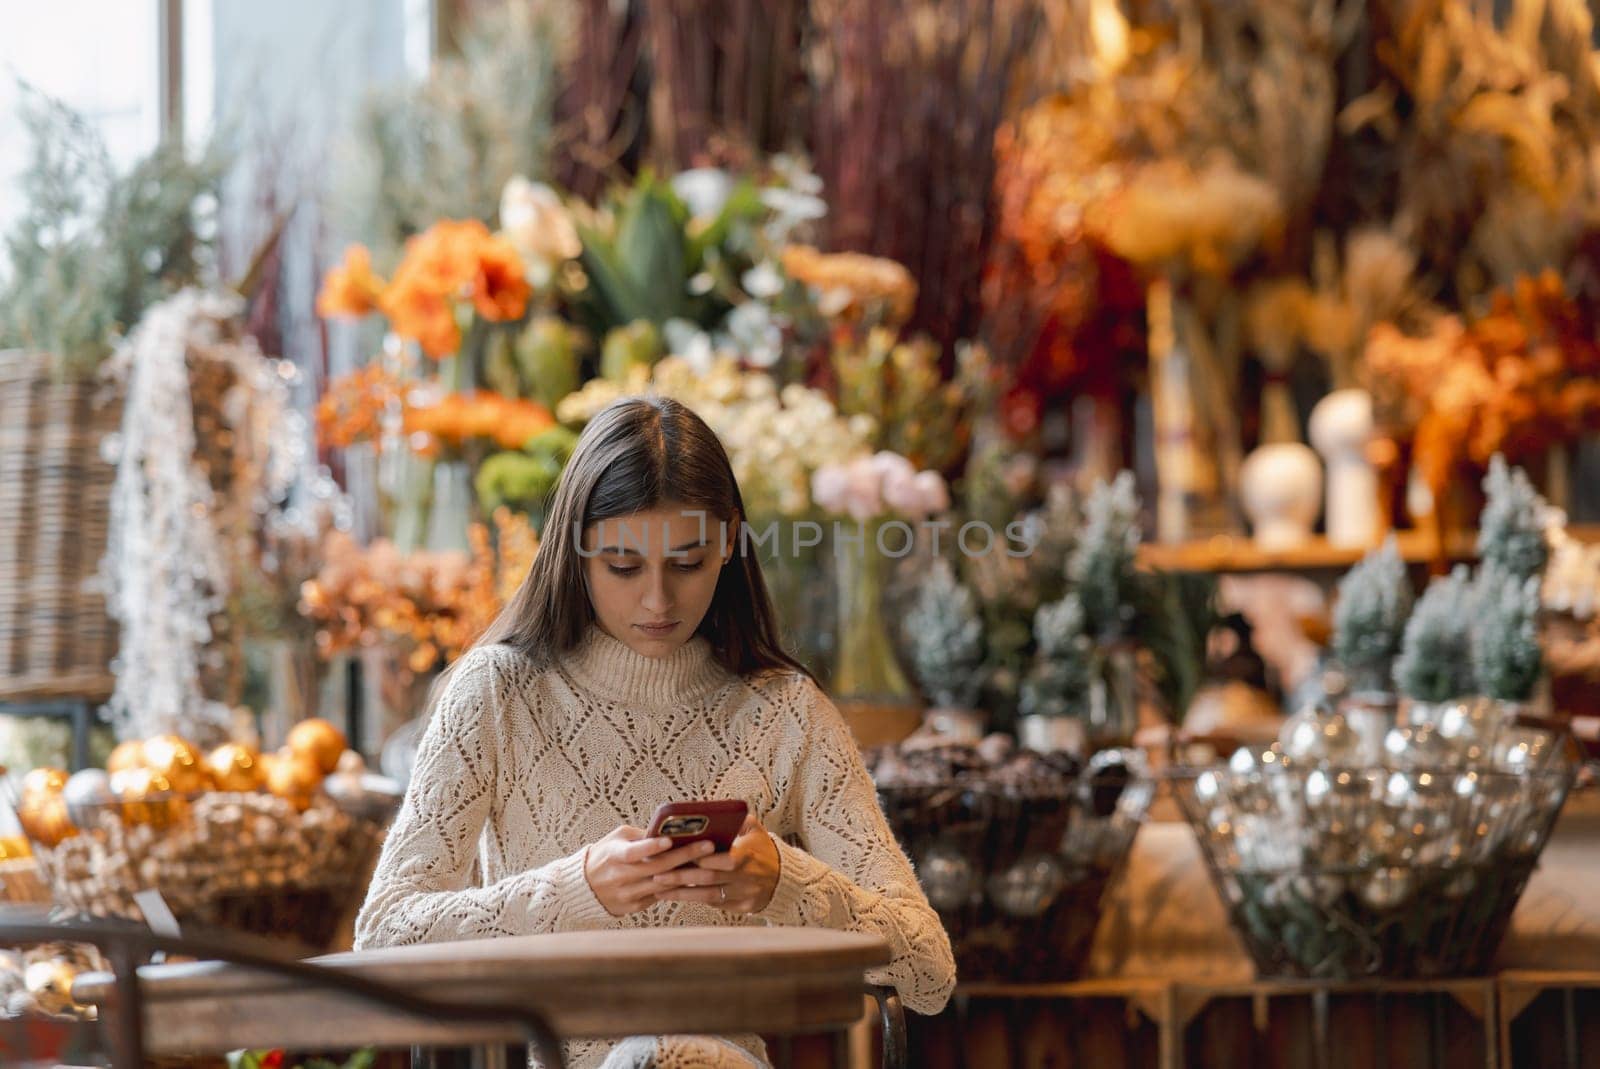 Exploring the decor shop, a young woman holds a phone in her hands. High quality photo